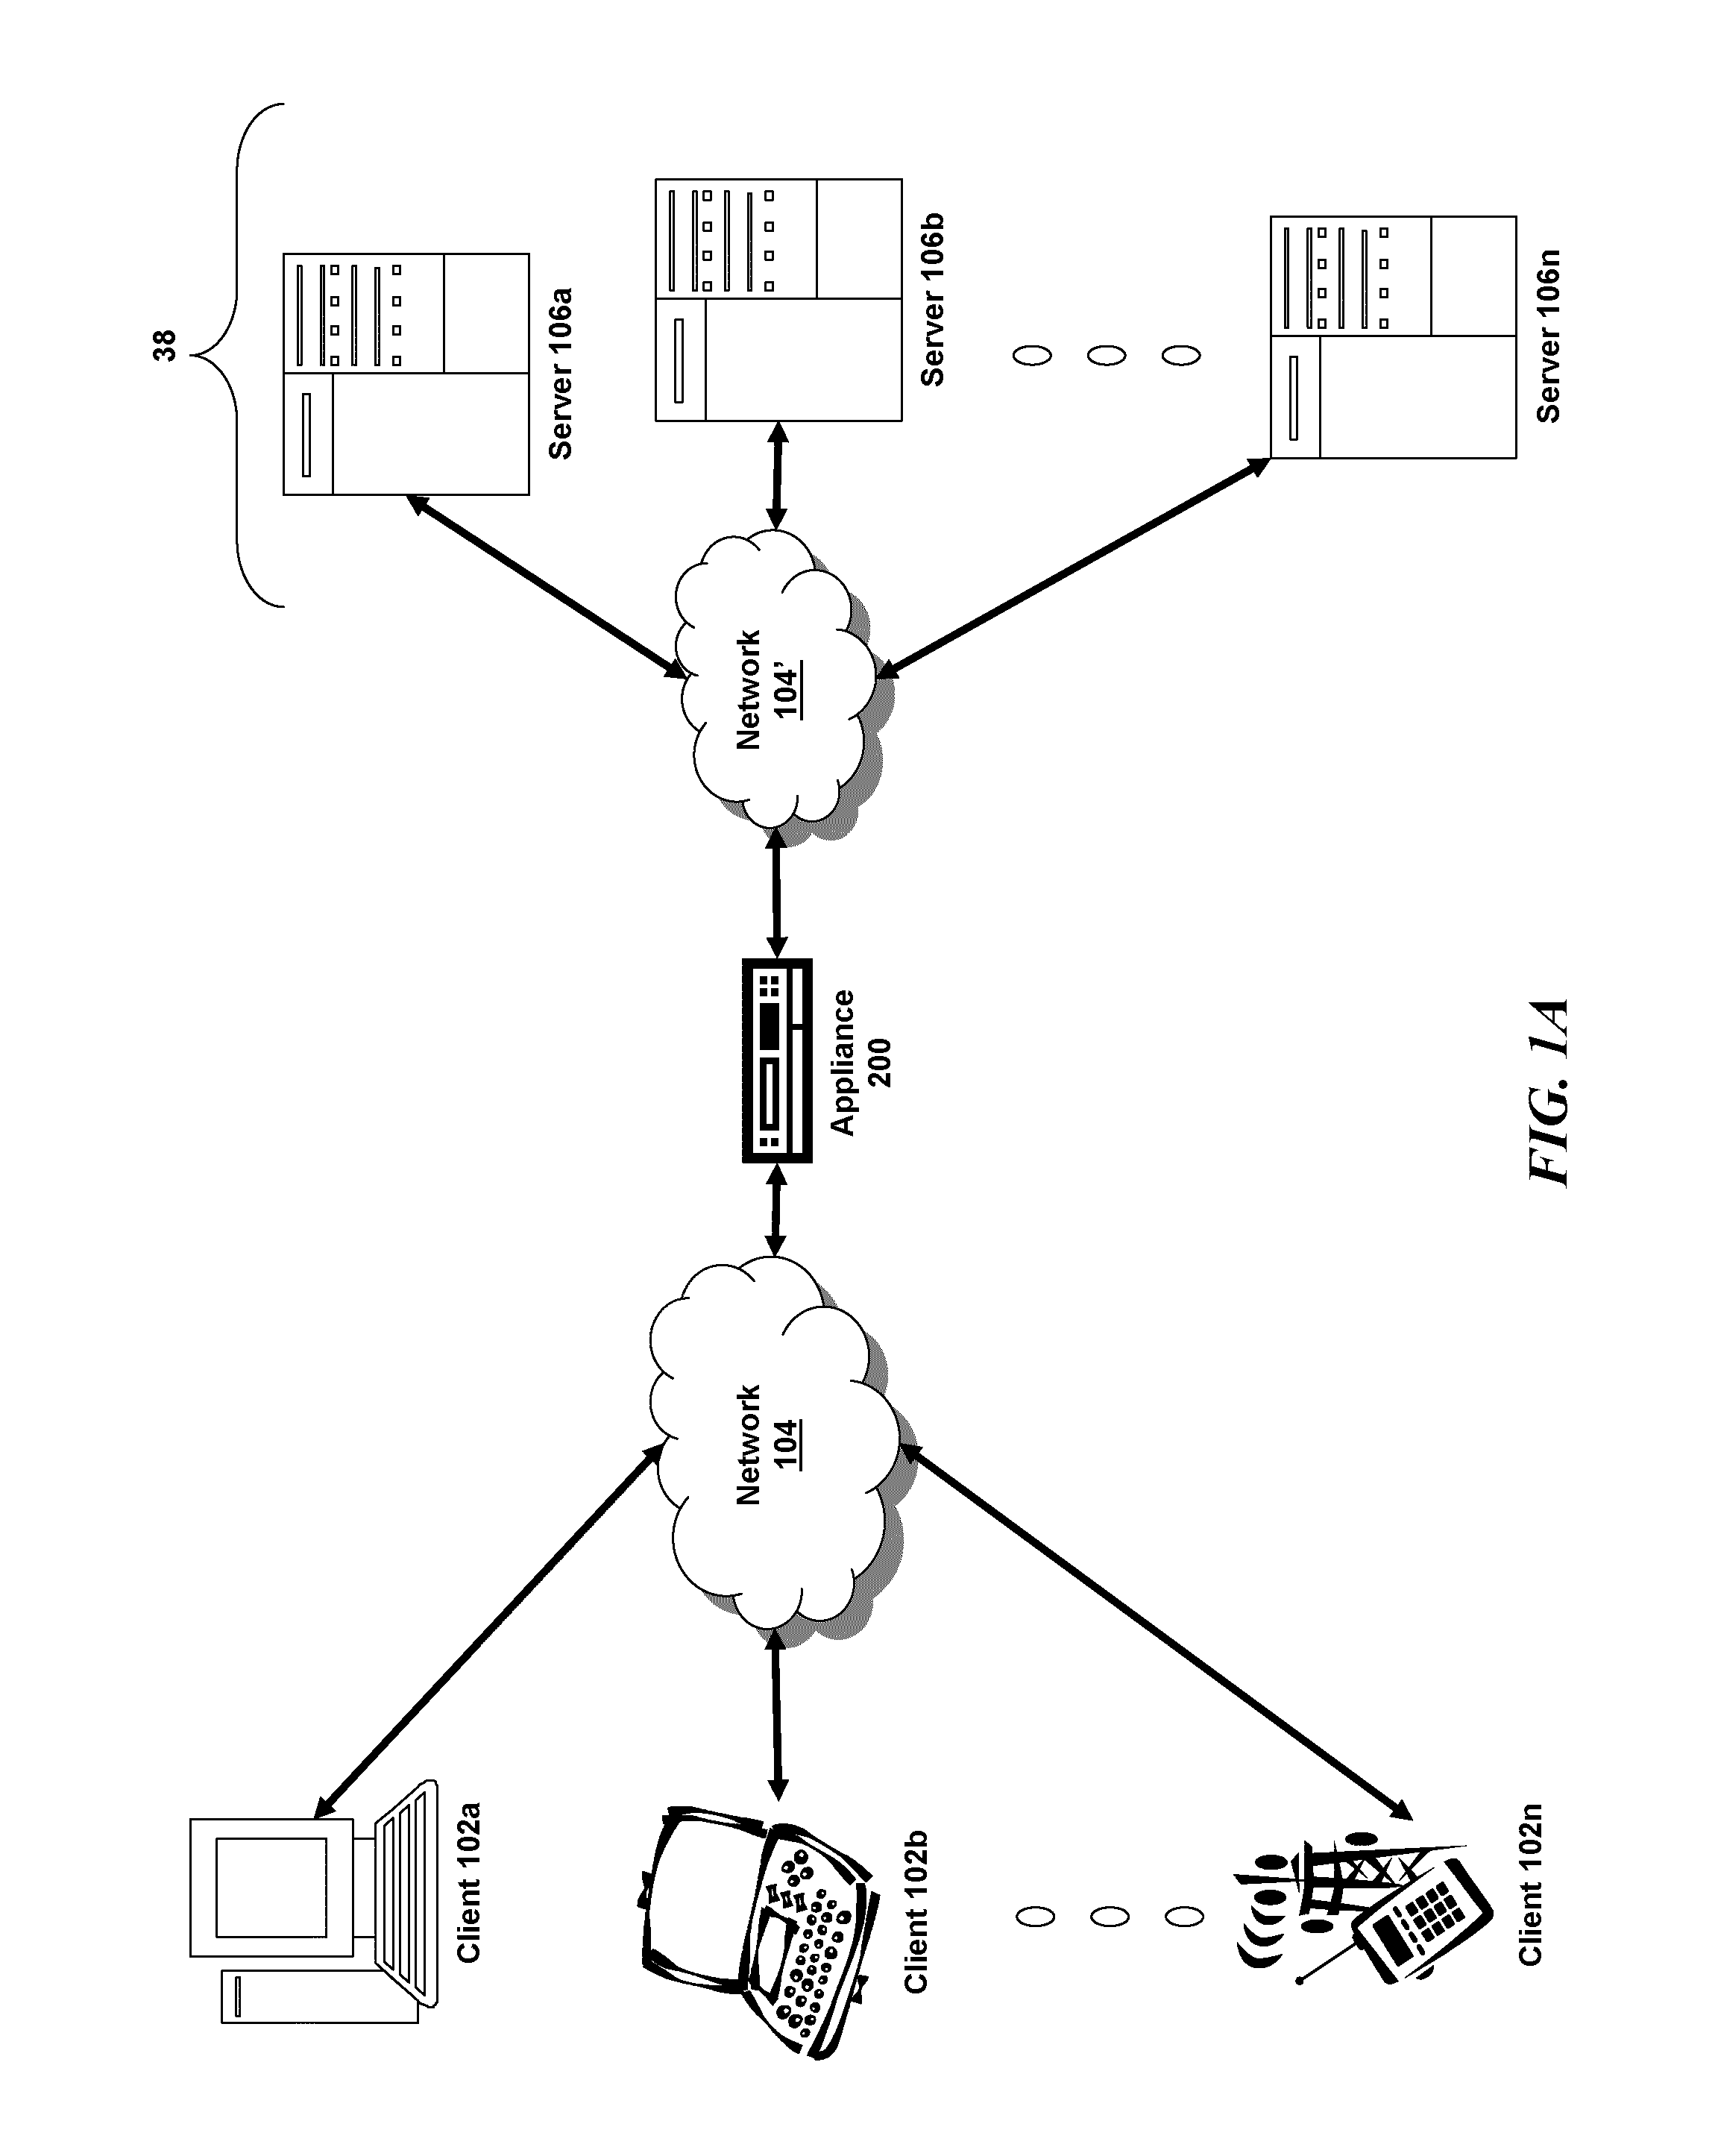 Systems and methods for providing link management in a multi-core system